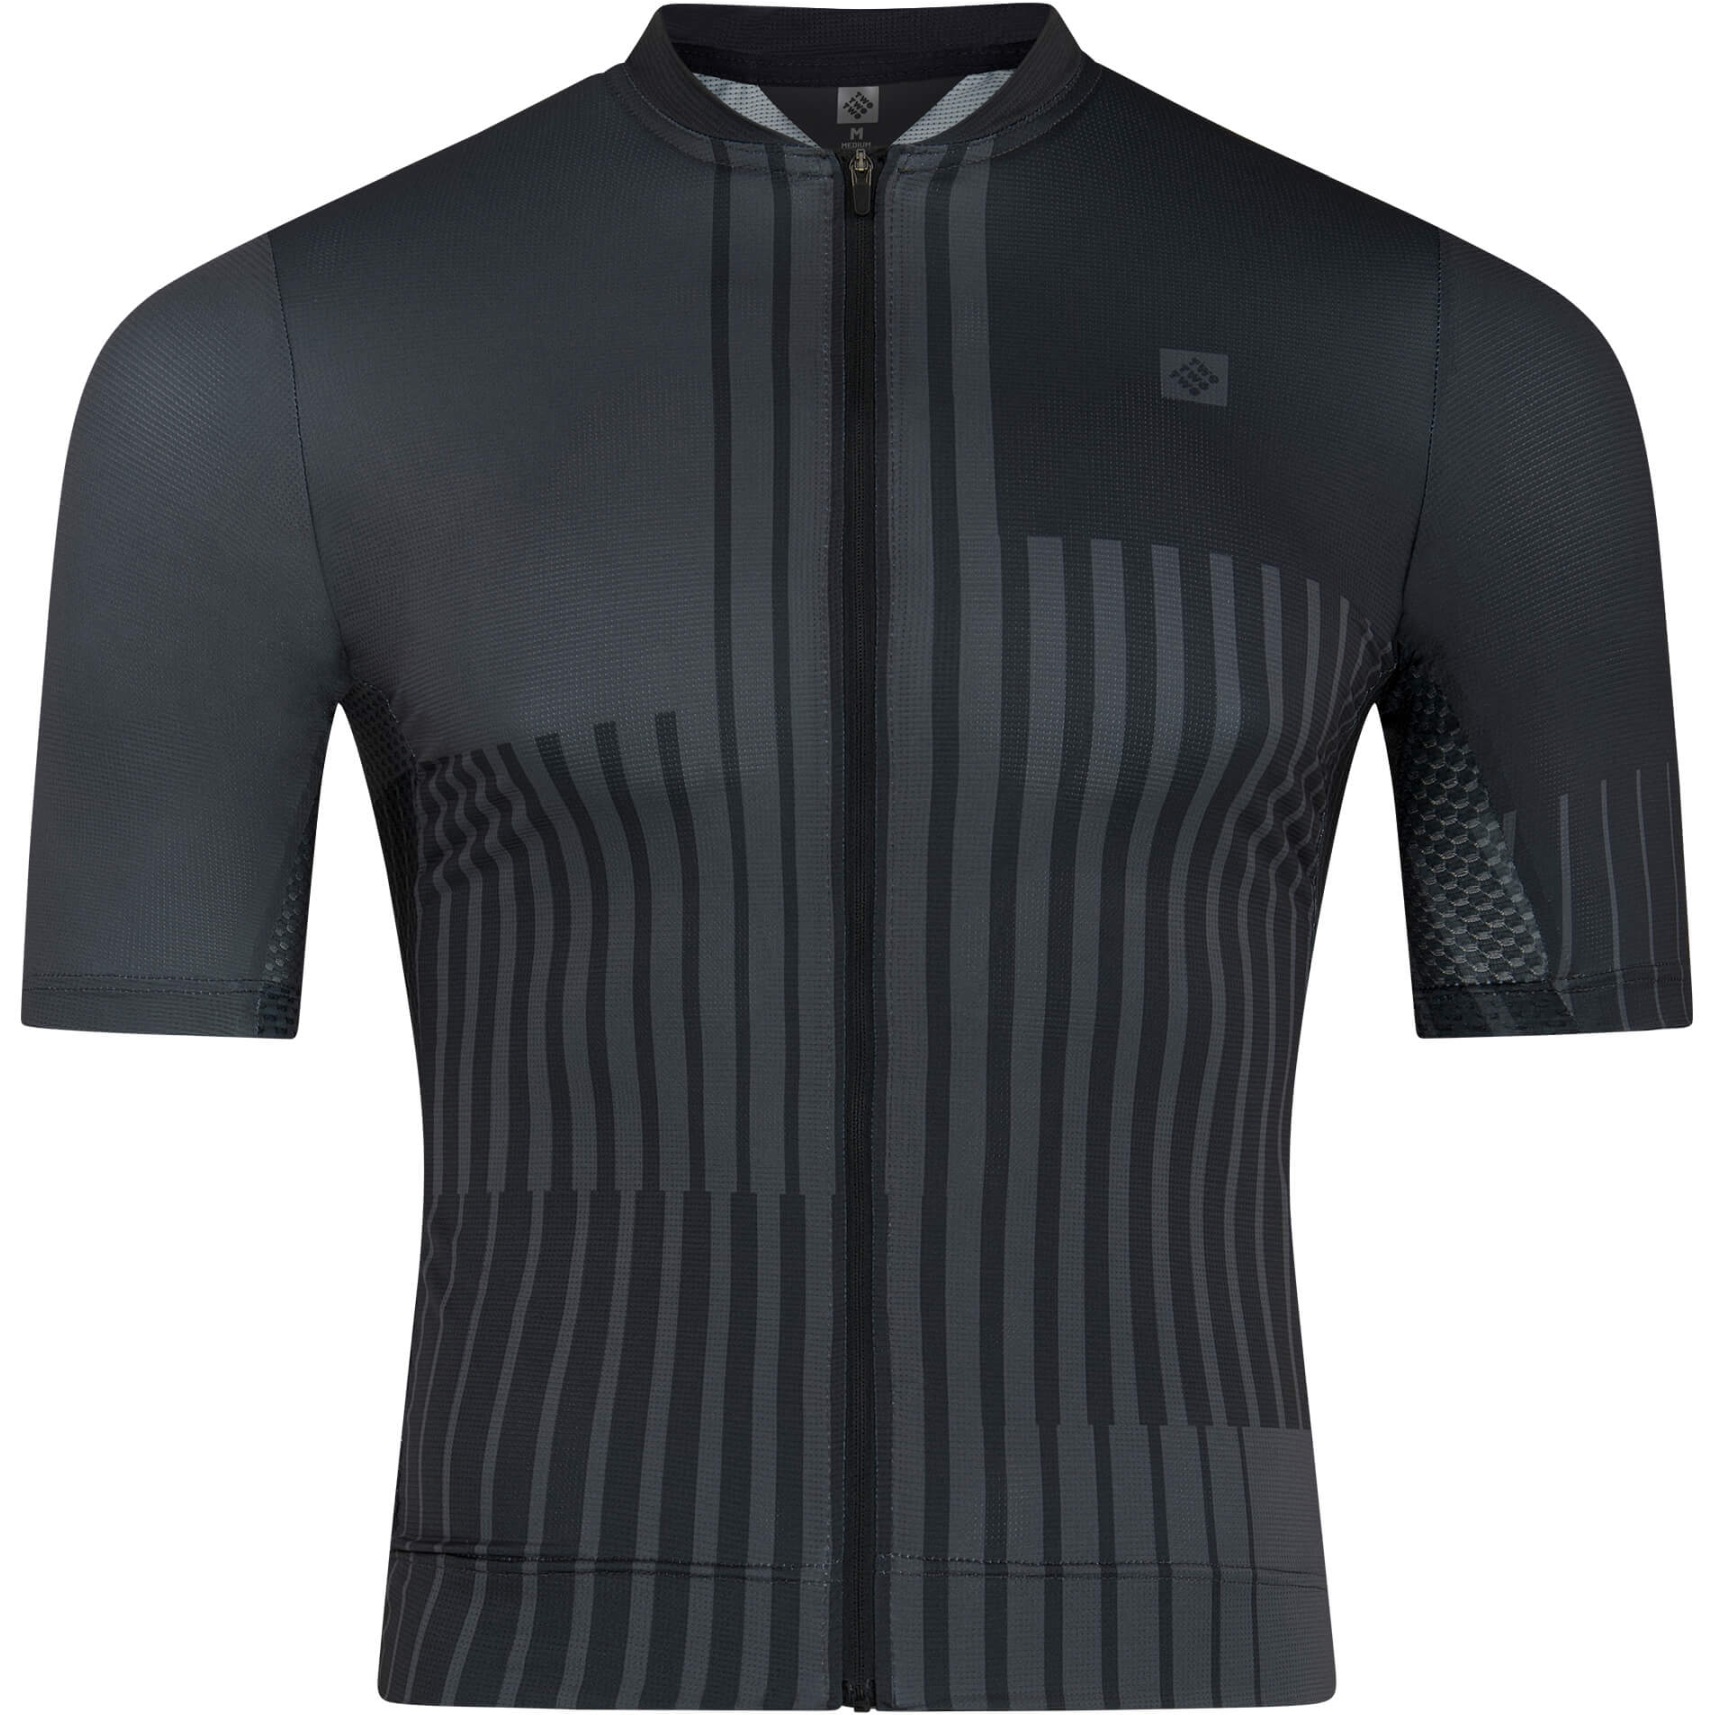 Picture of triple2 Velozip Evo Jersey - moonless night